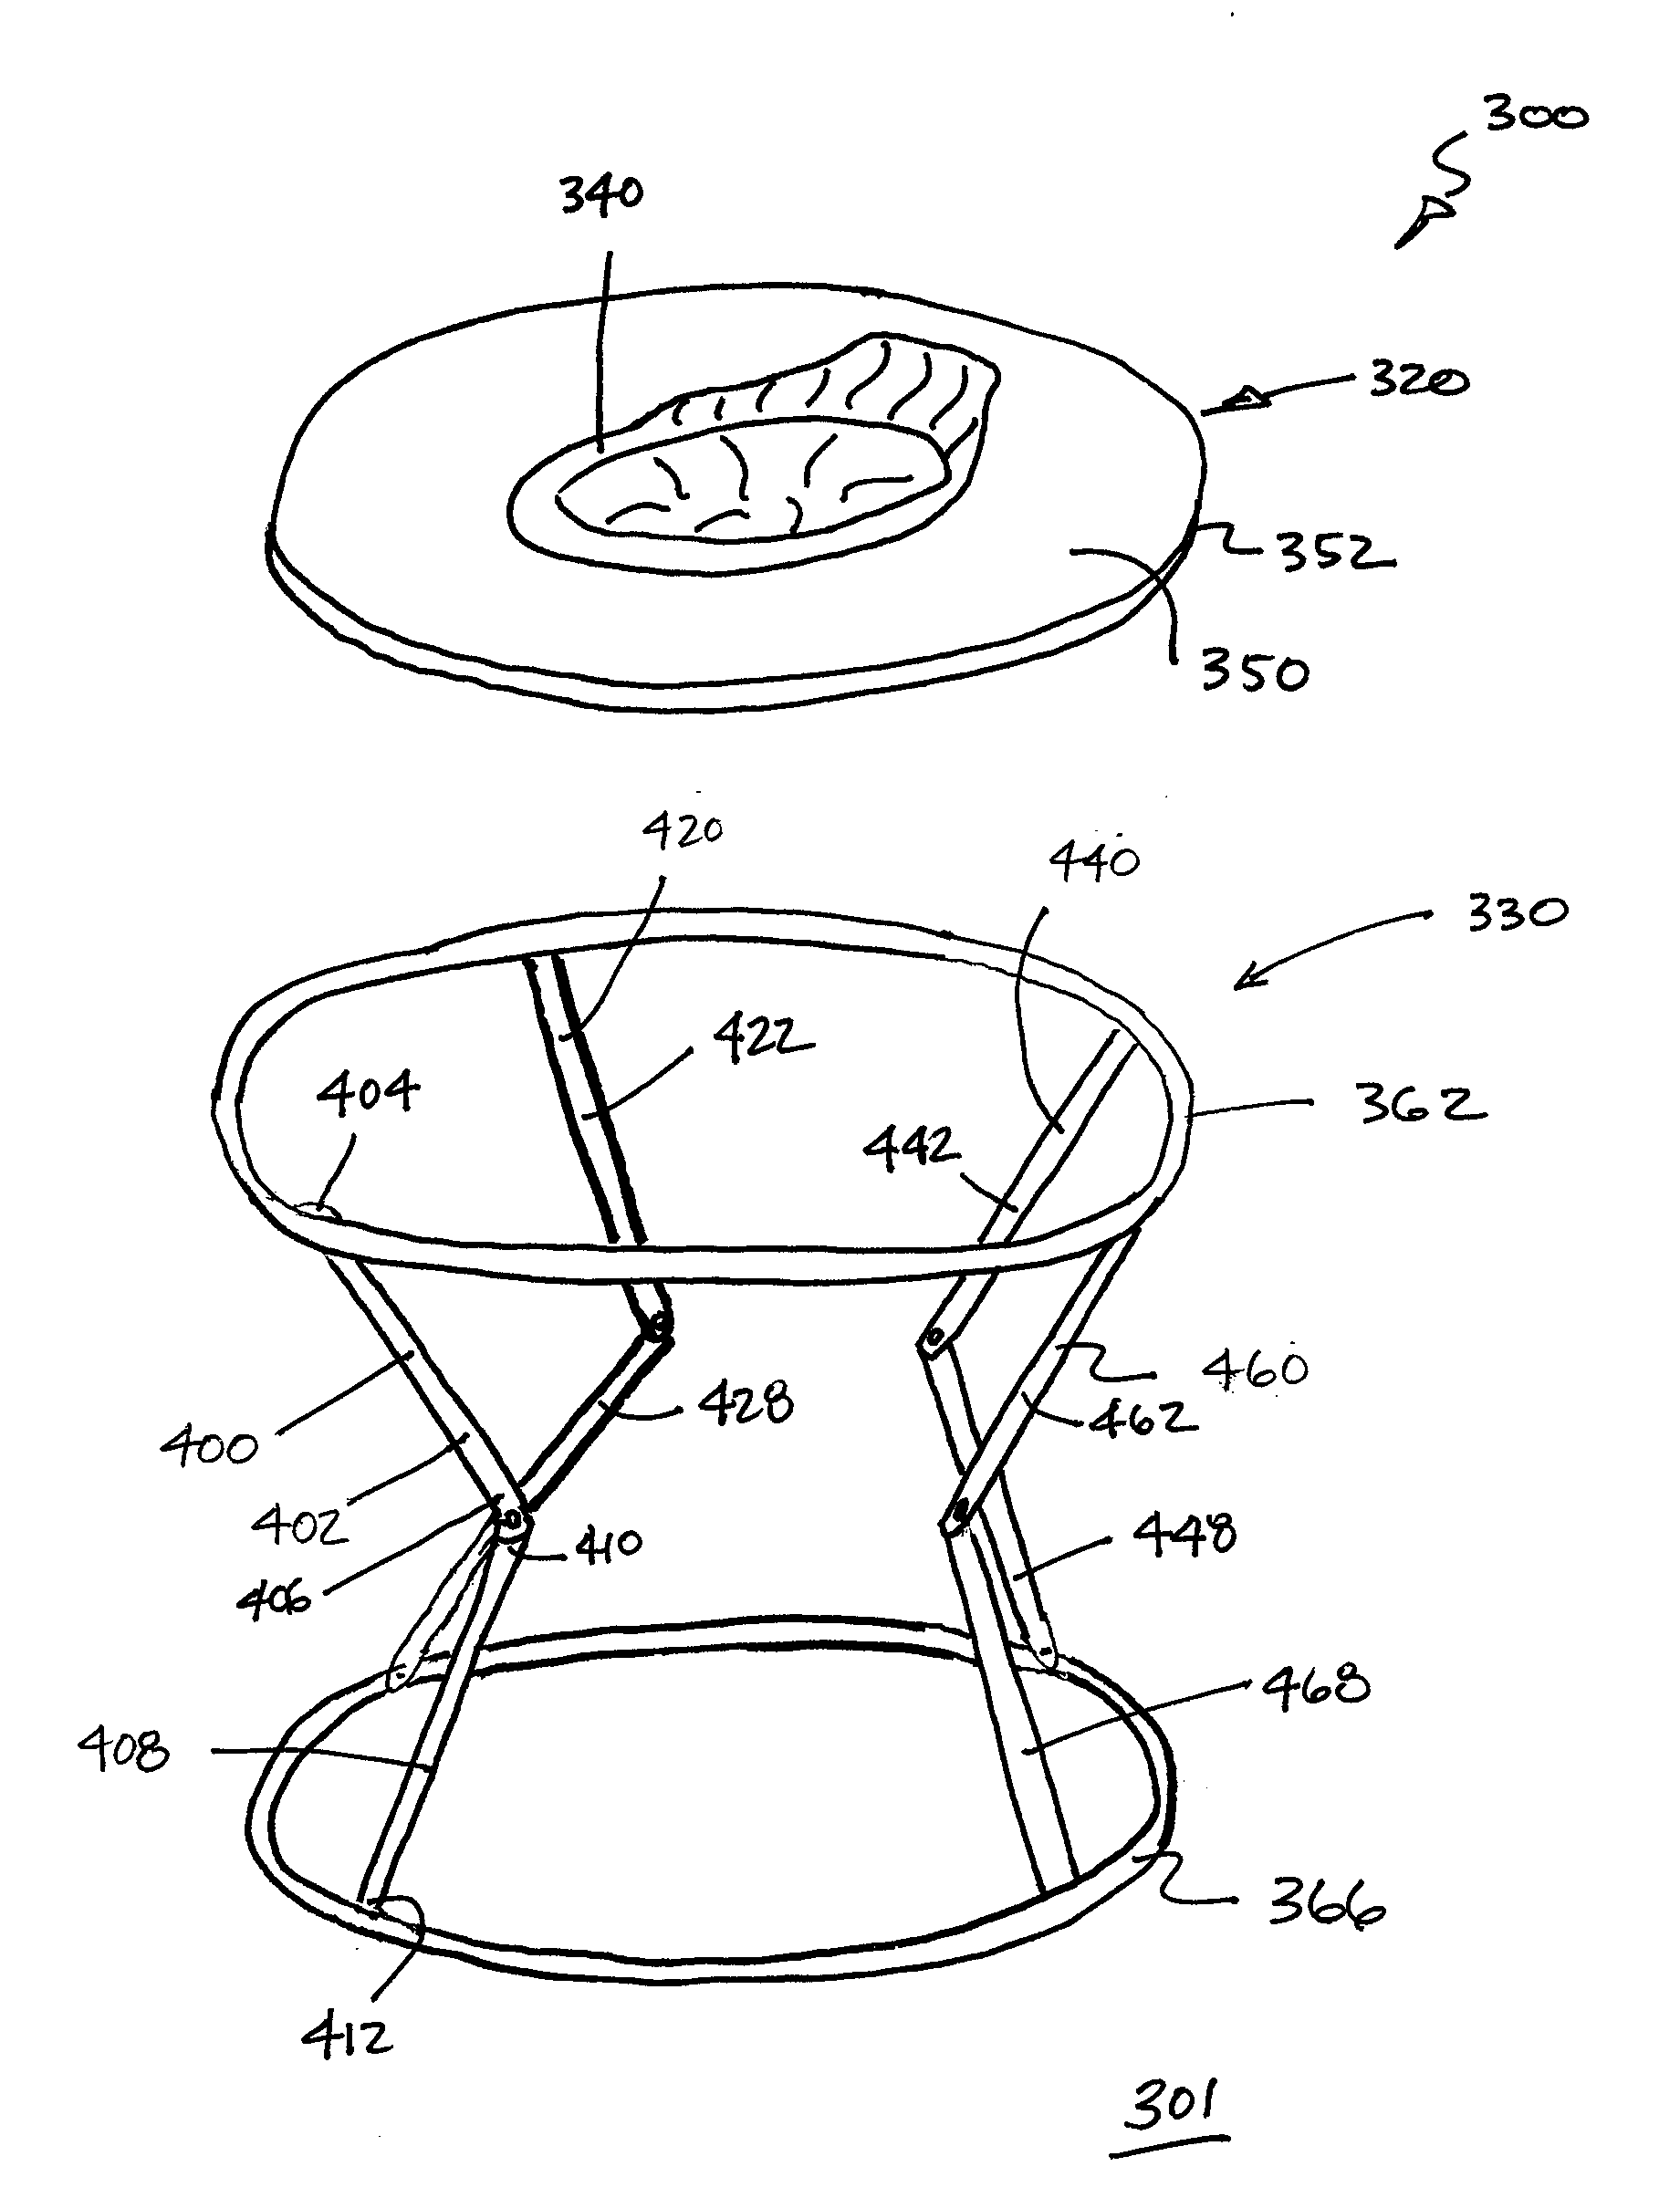 Infant Support Structure with Supported Seat